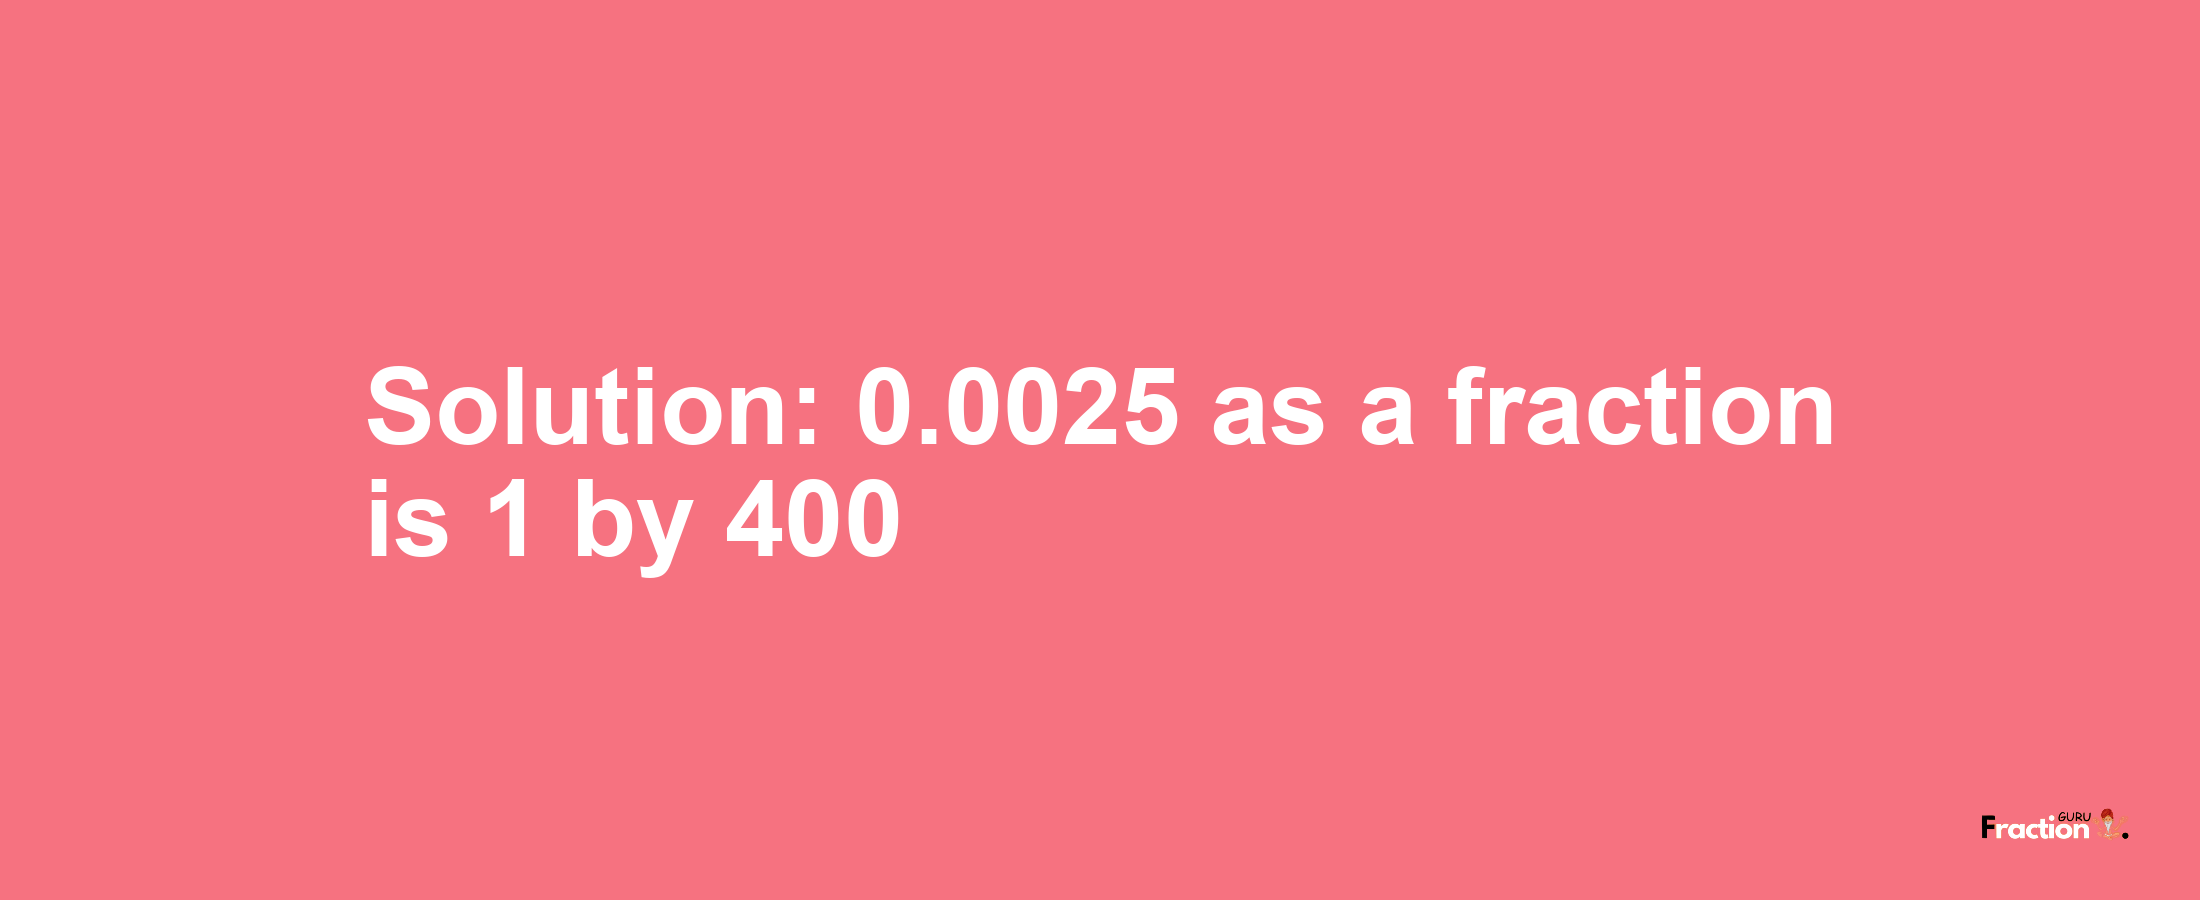 Solution:0.0025 as a fraction is 1/400